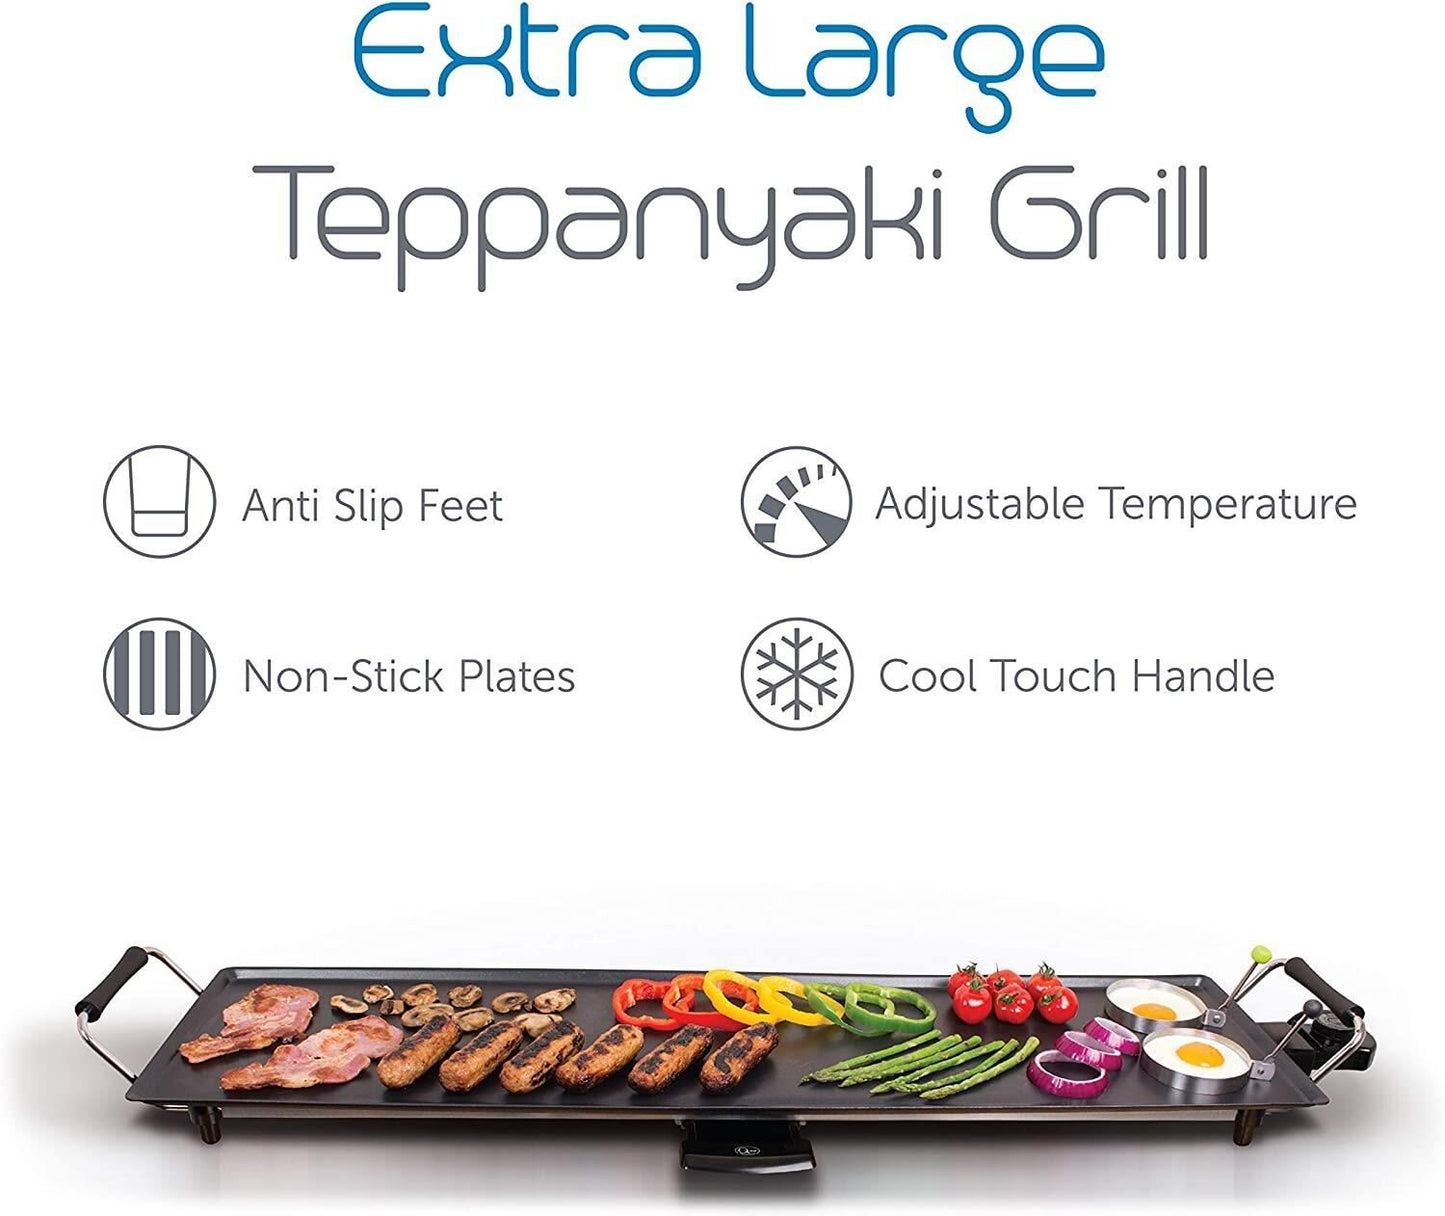 Extra Large Quest Electric Non-Stick Table Top Grill - Teppanyaki  (35790)